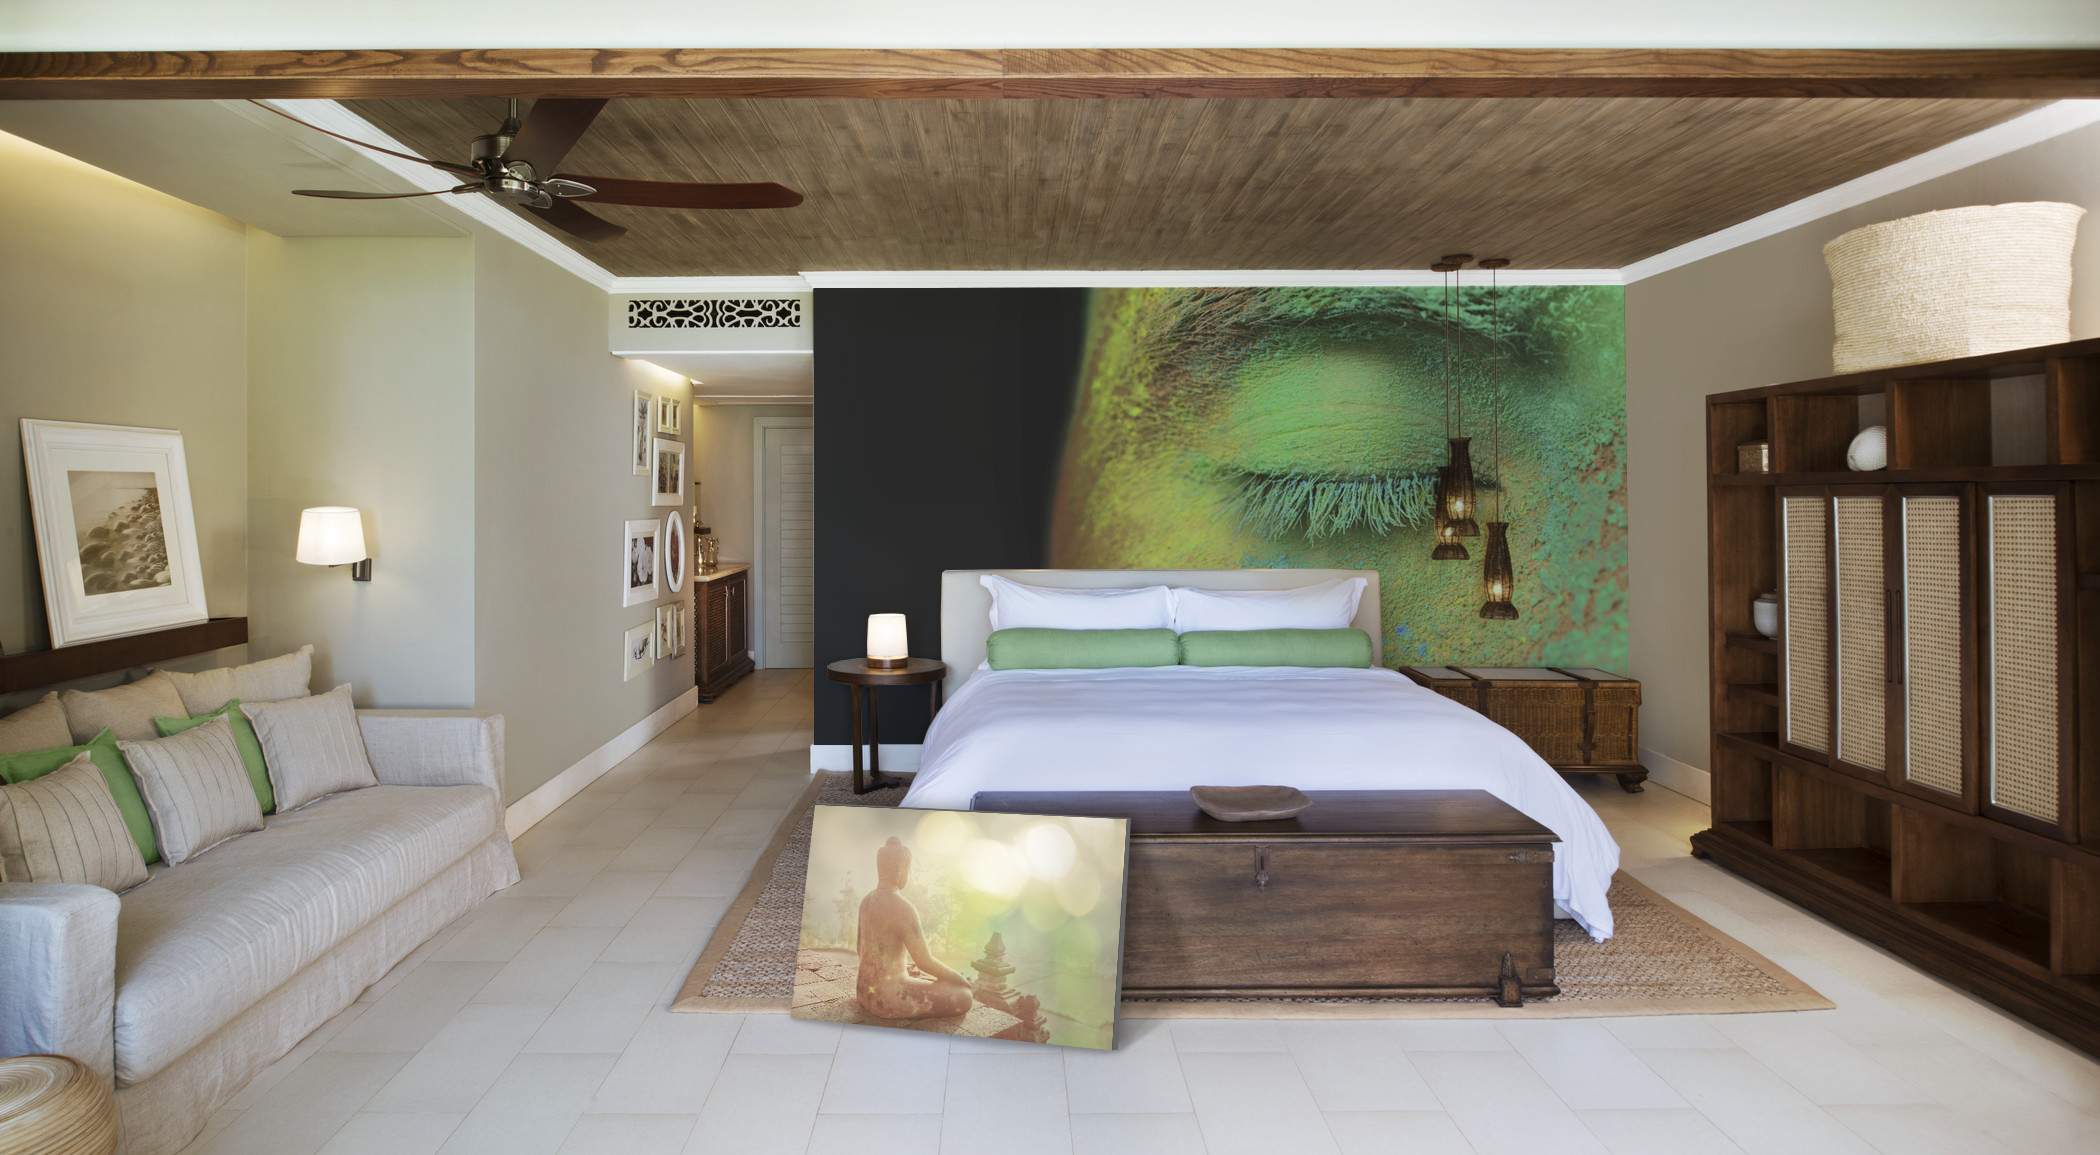 Point of view • Colonial - Bedroom - Architecture and buildings - People - Wall Murals - Prints